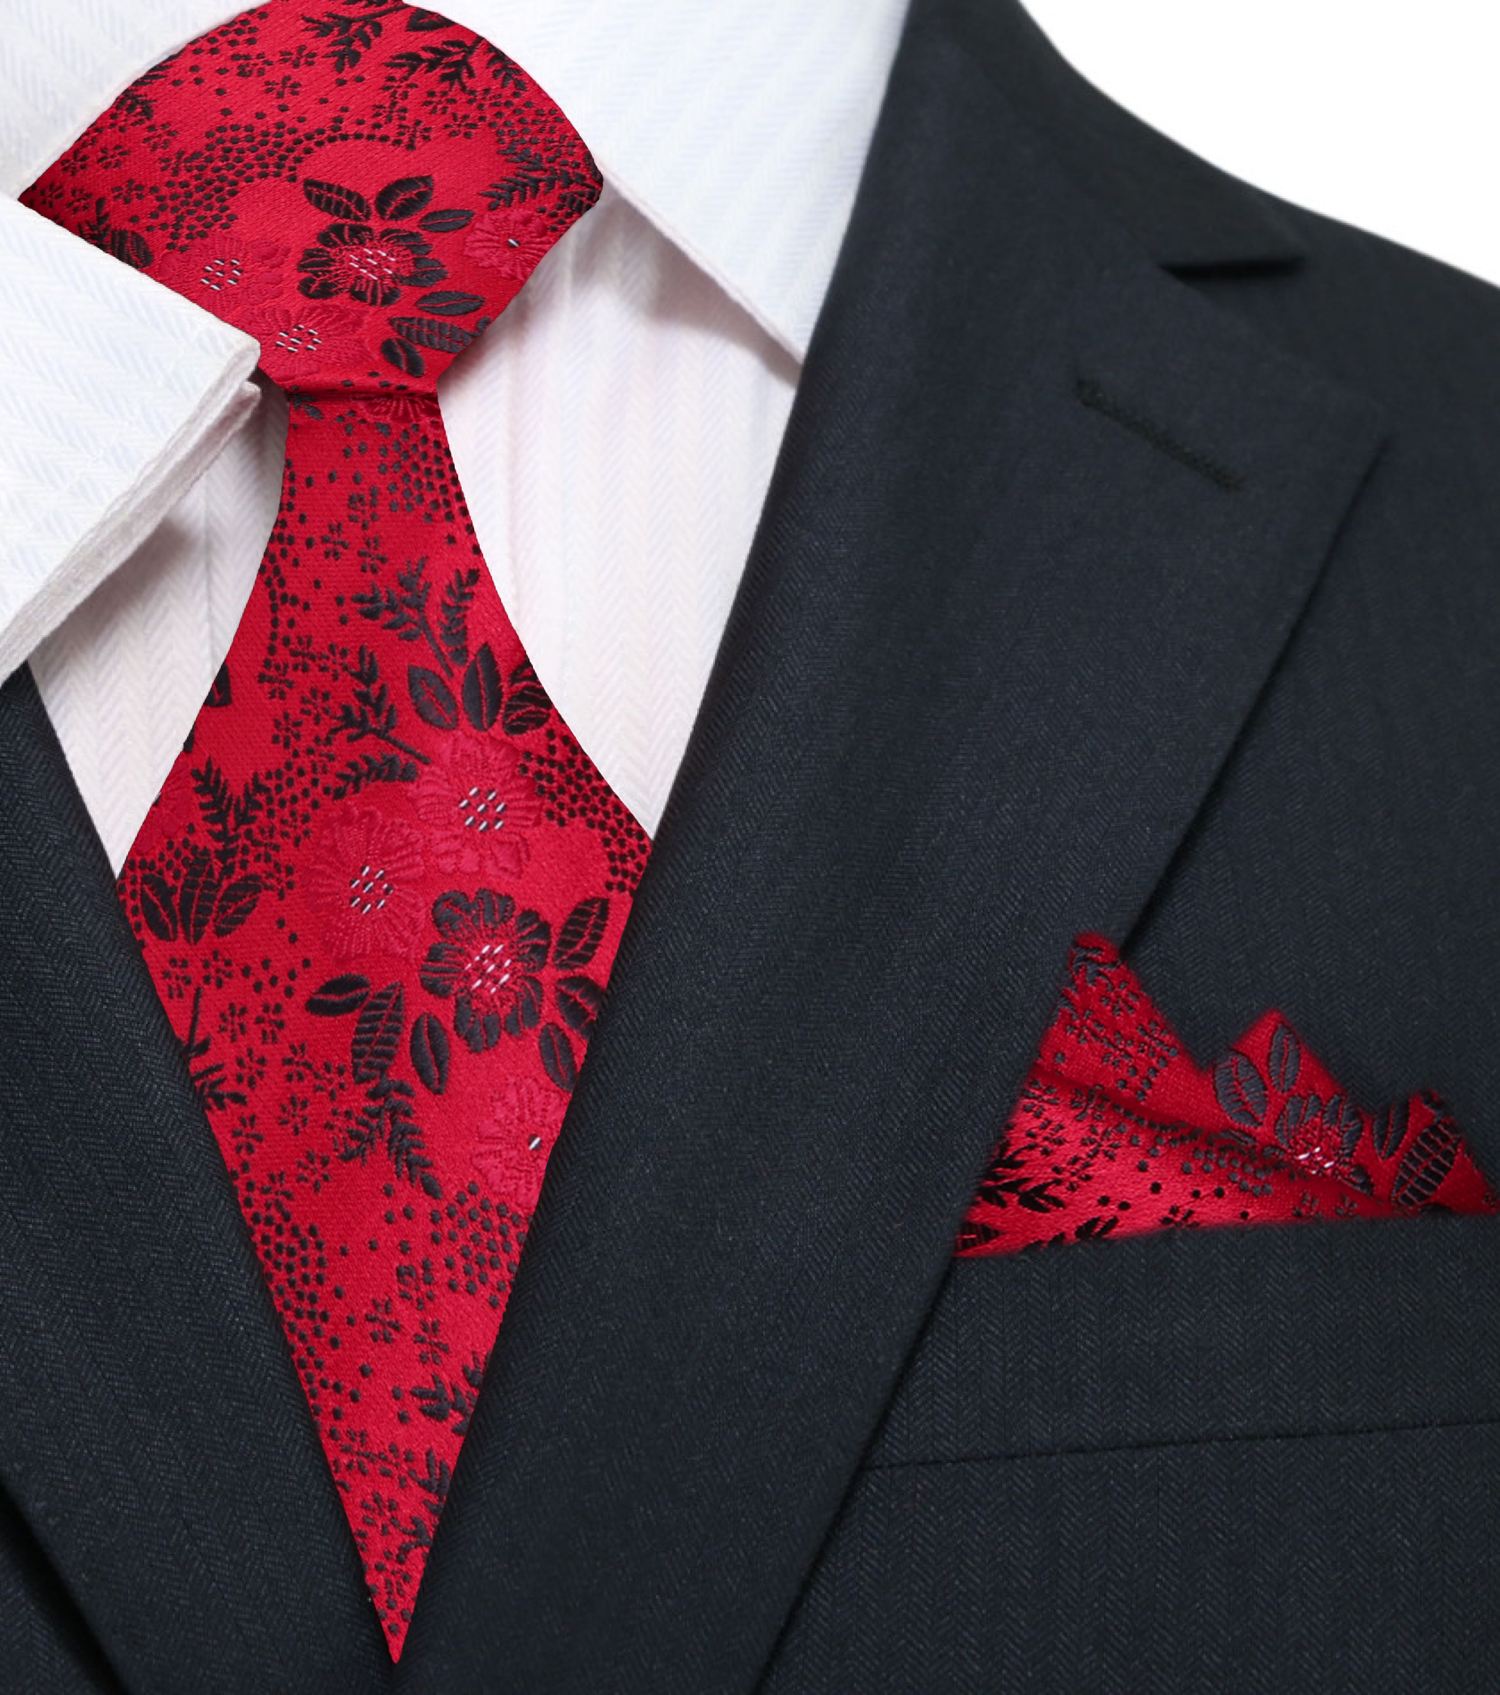 A Red With Black Floral Pattern Necktie With Matching Pocket Square